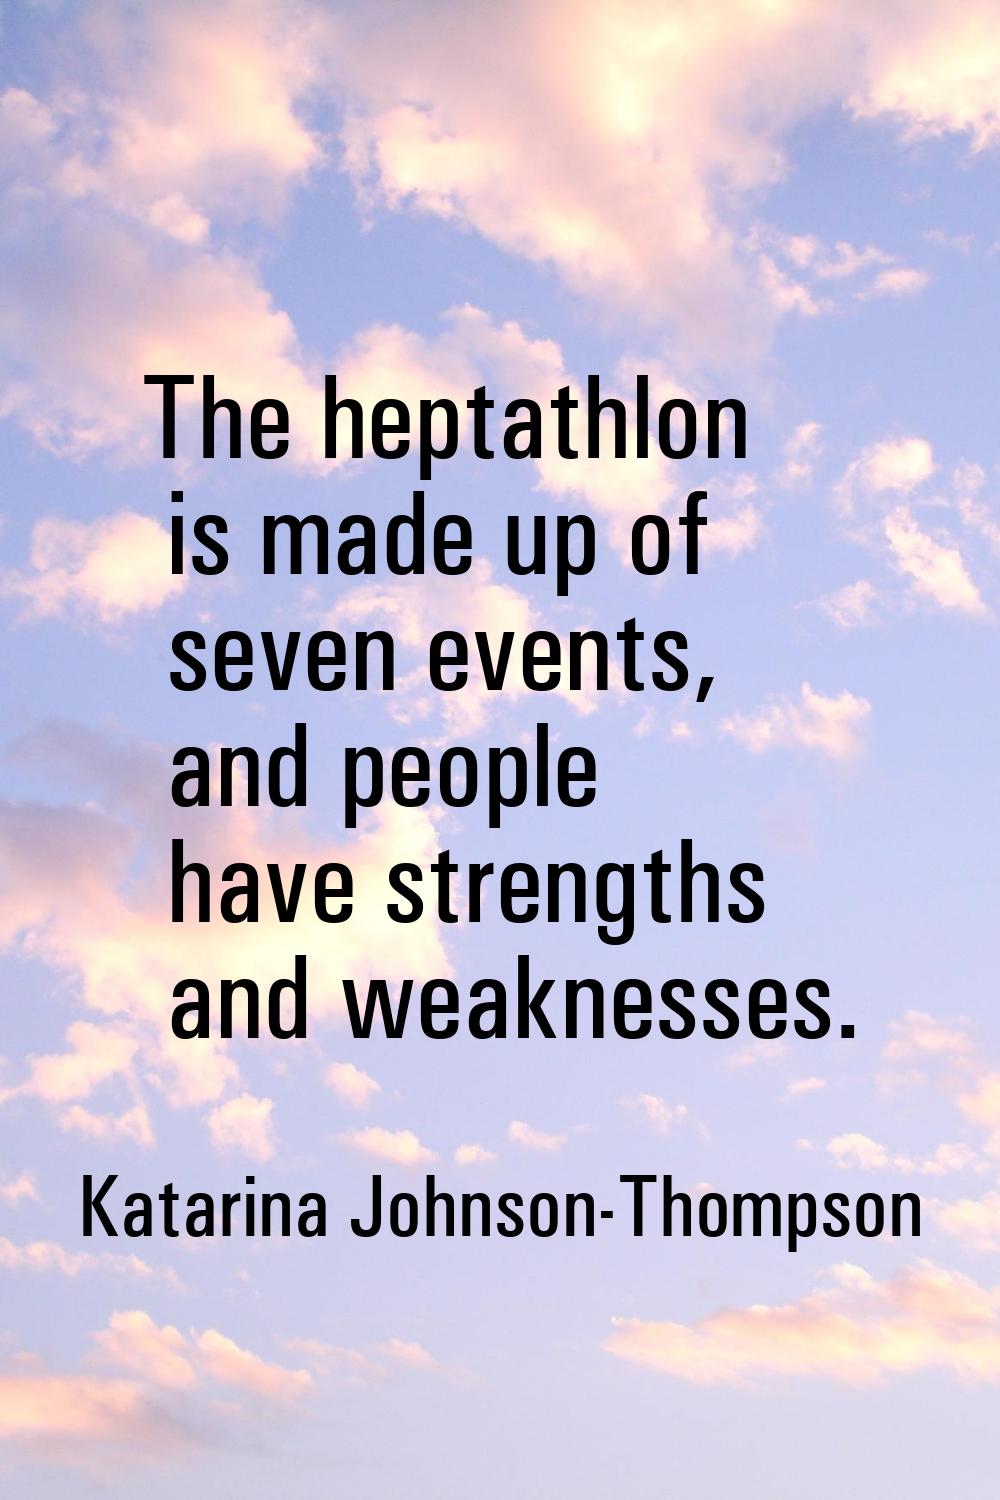 The heptathlon is made up of seven events, and people have strengths and weaknesses.